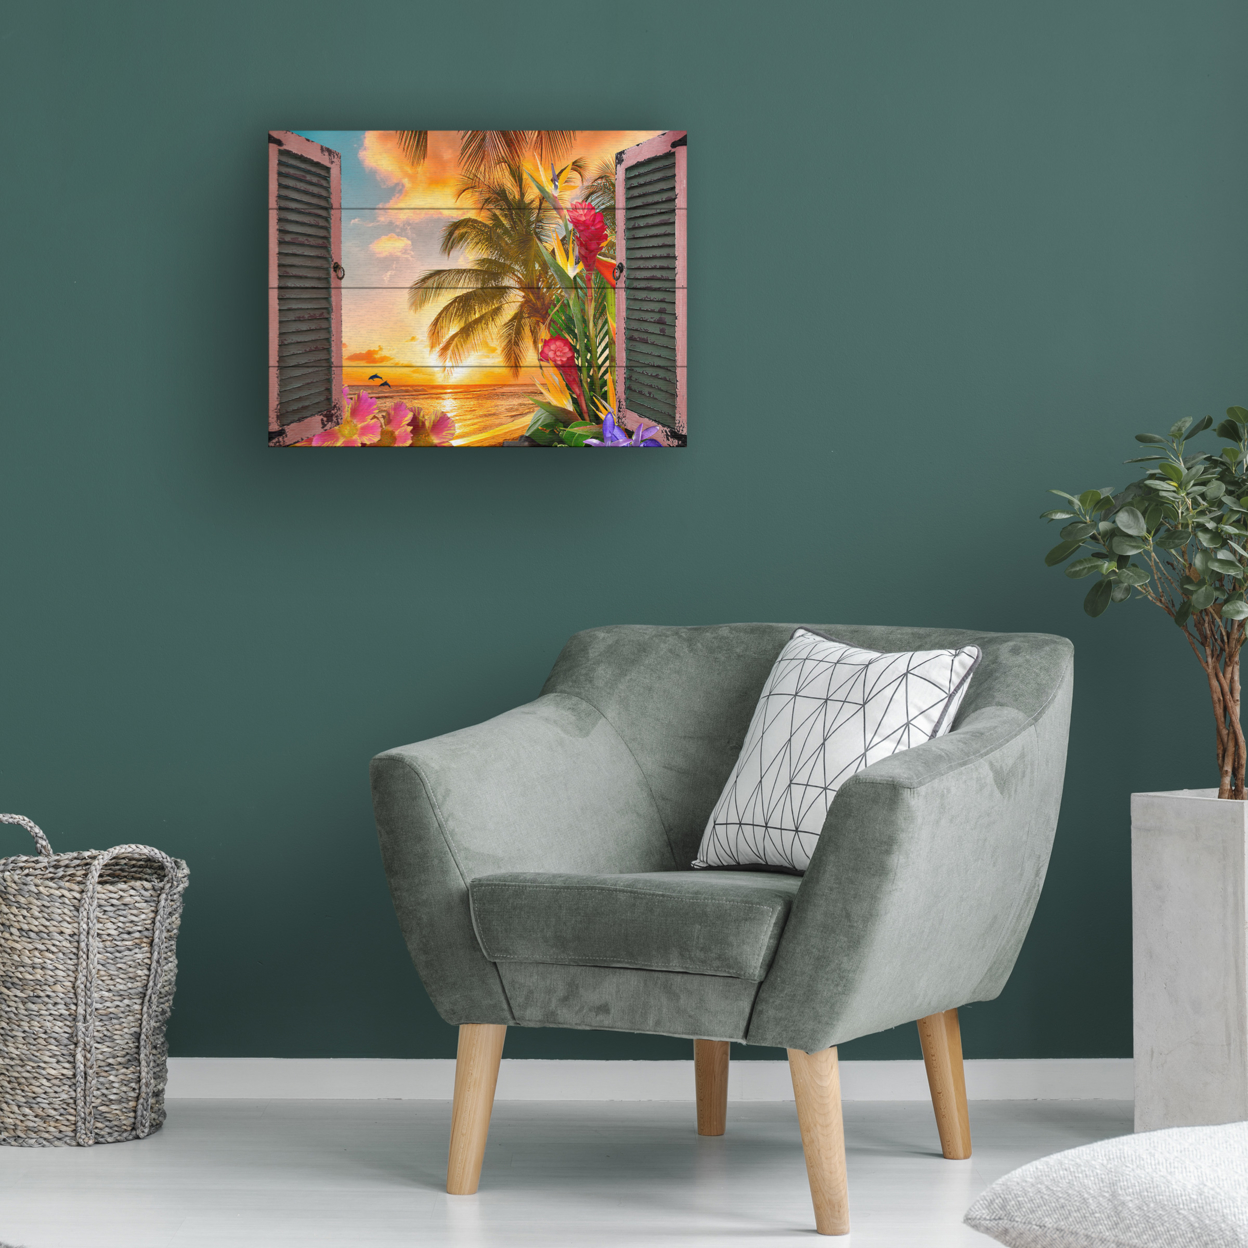 Wall Art 12 X 16 Inches Titled Window To Paradise II Ready To Hang Printed On Wooden Planks